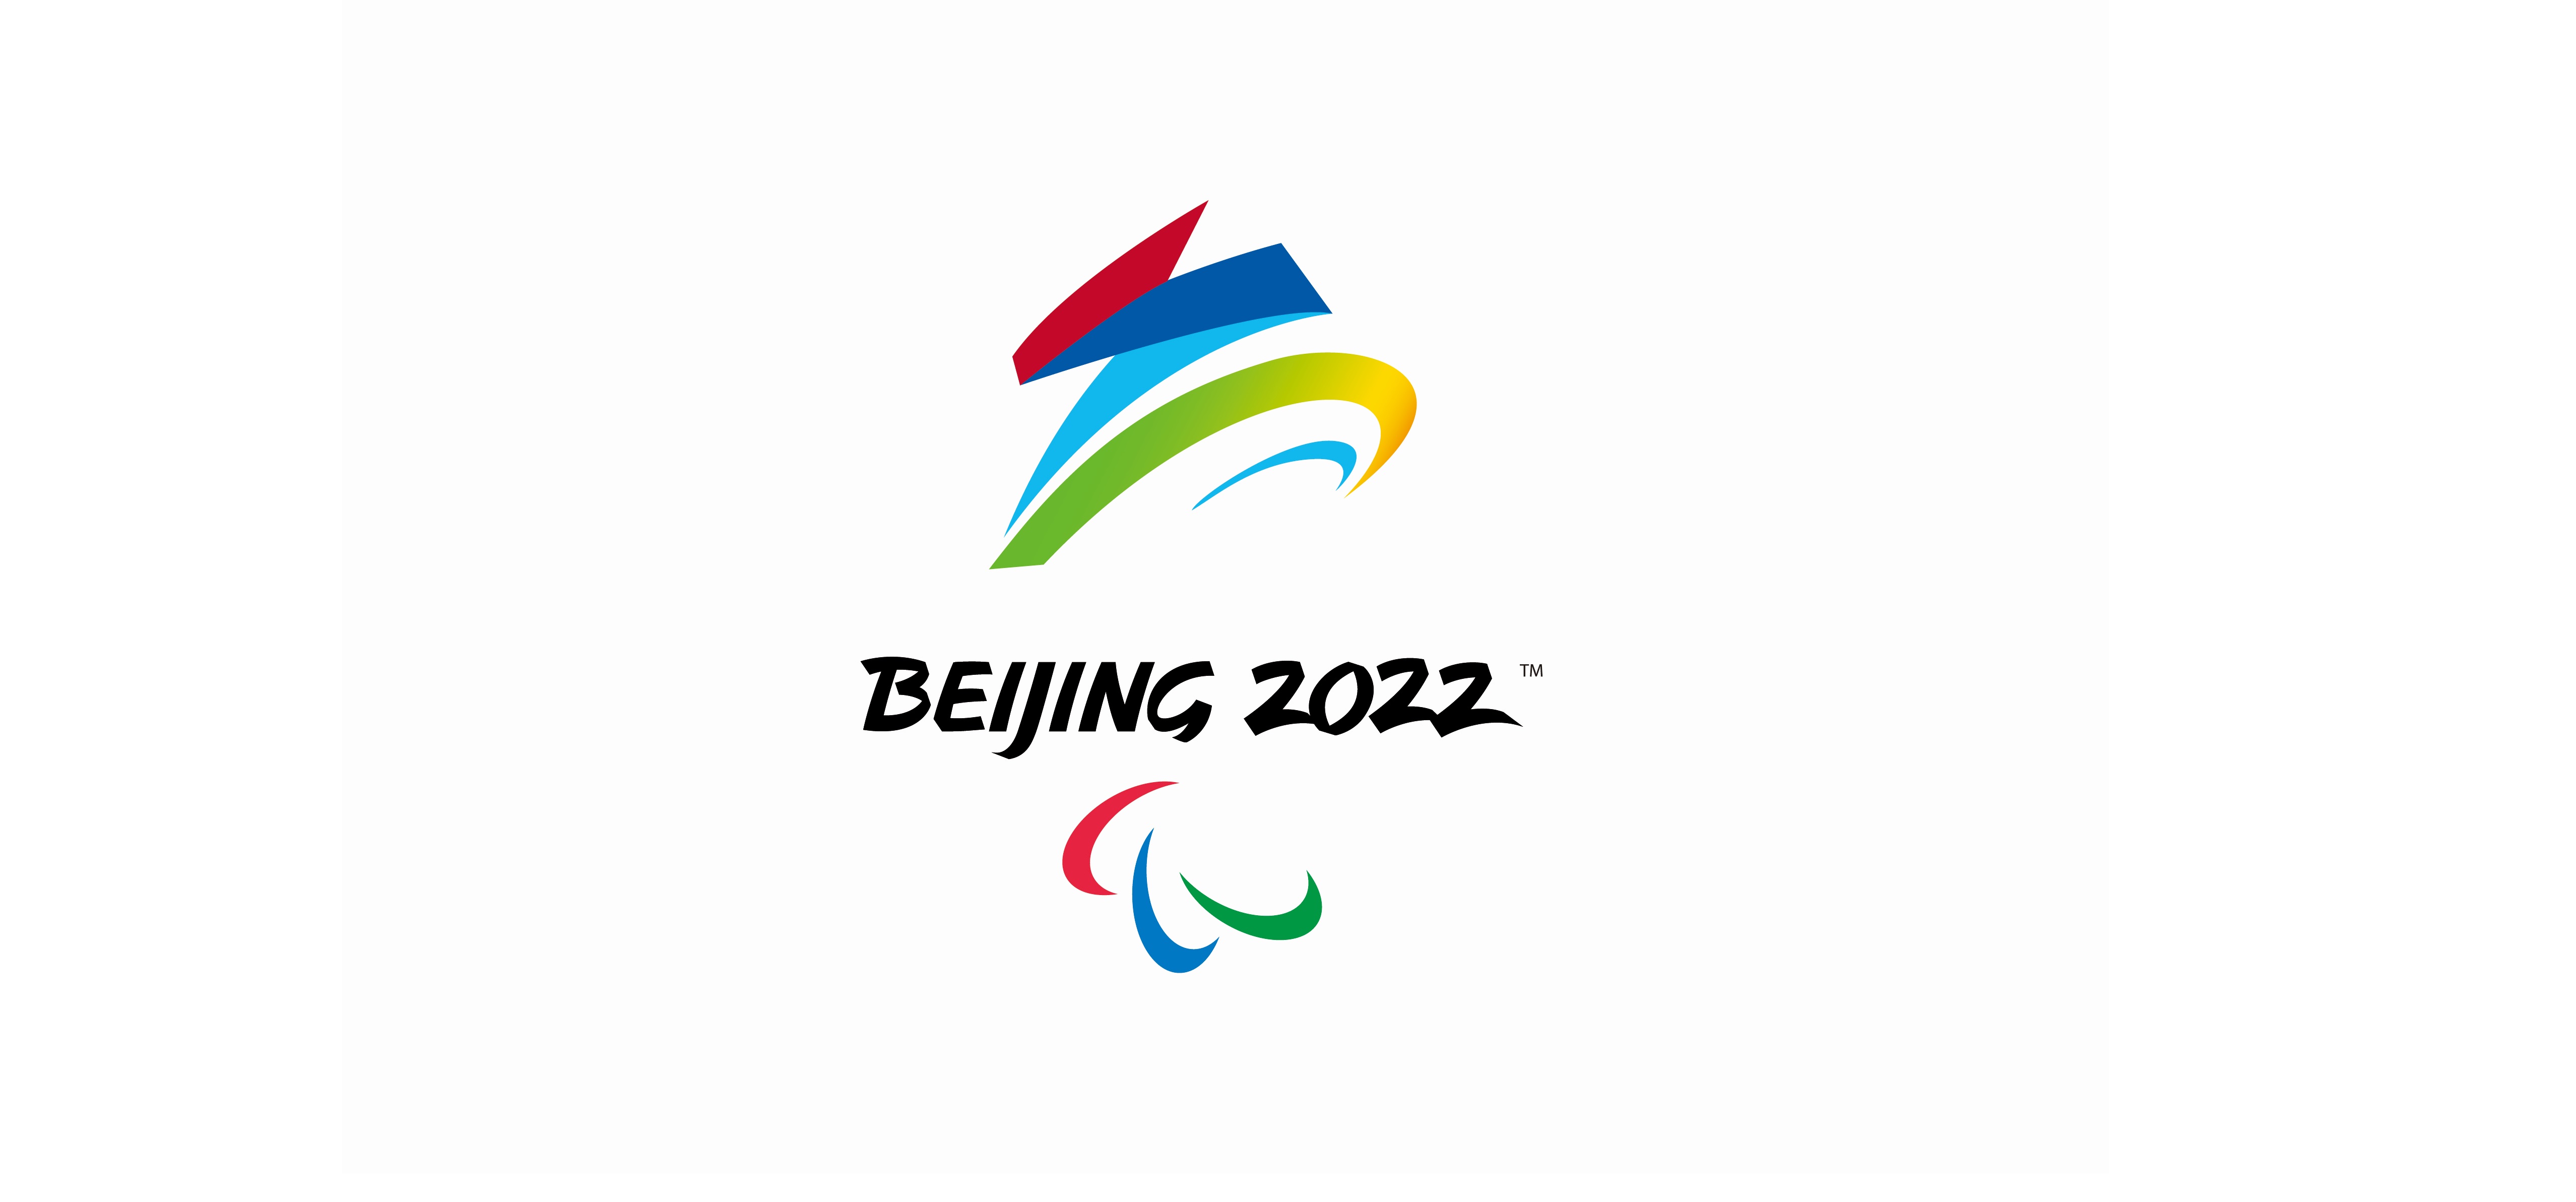 Beijing 2022  revise emblem for Paralympic Winter Games 